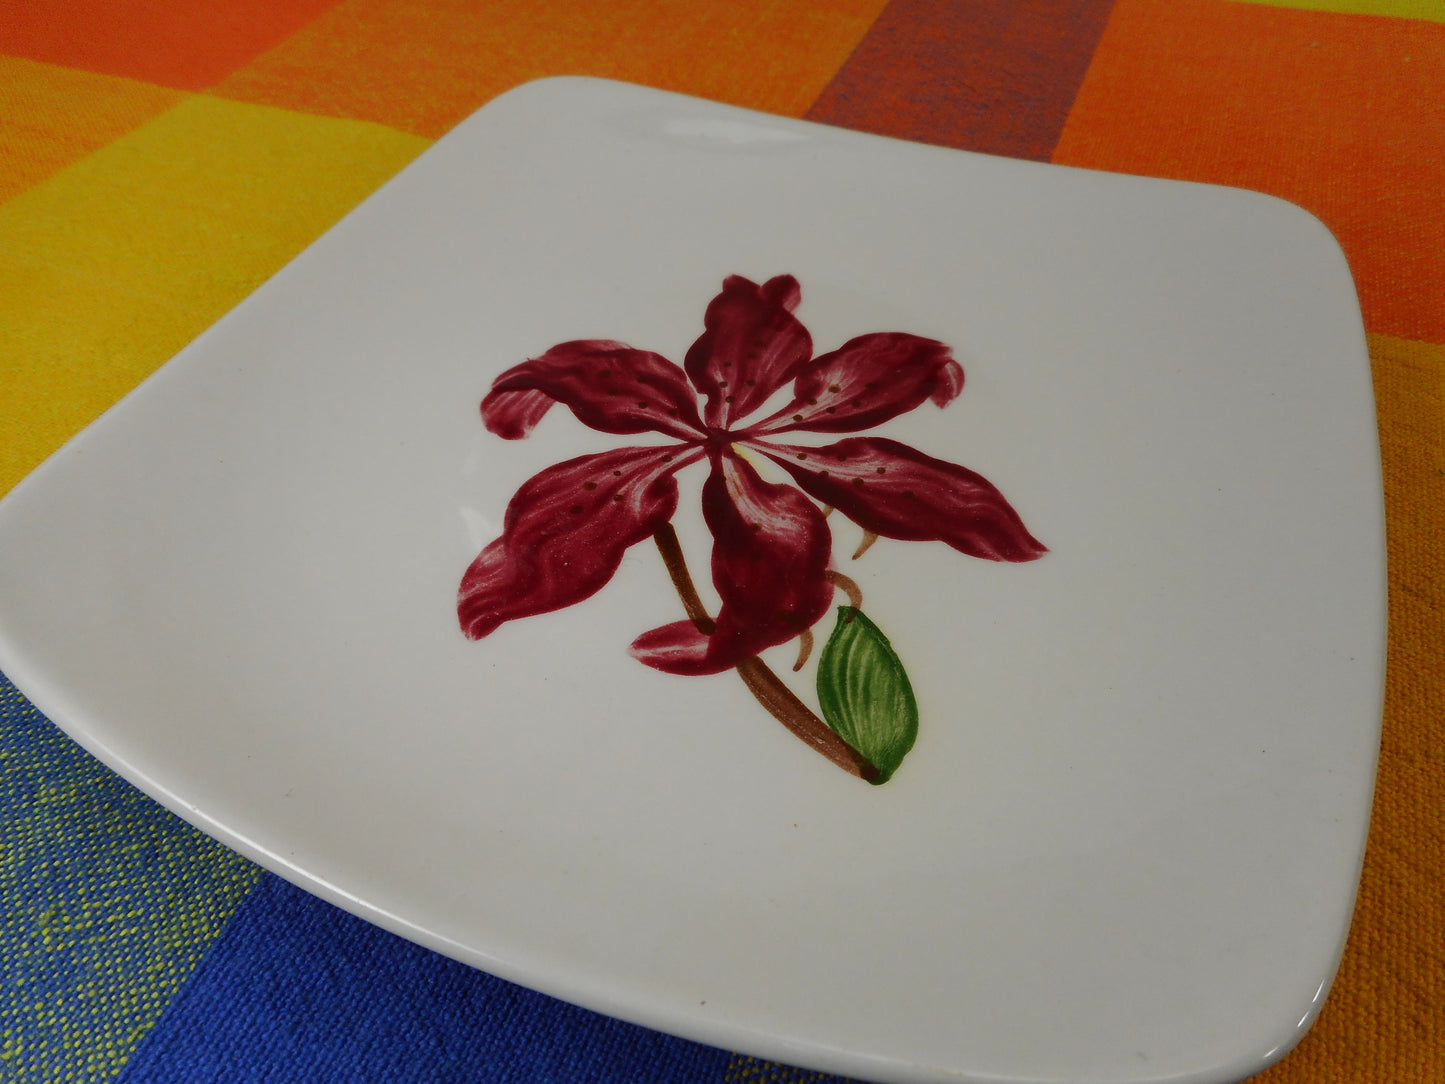 Orchard Ware California Pottery Red Lily Flower - Square Bread & Butter Plate 5-7/8" Vintage